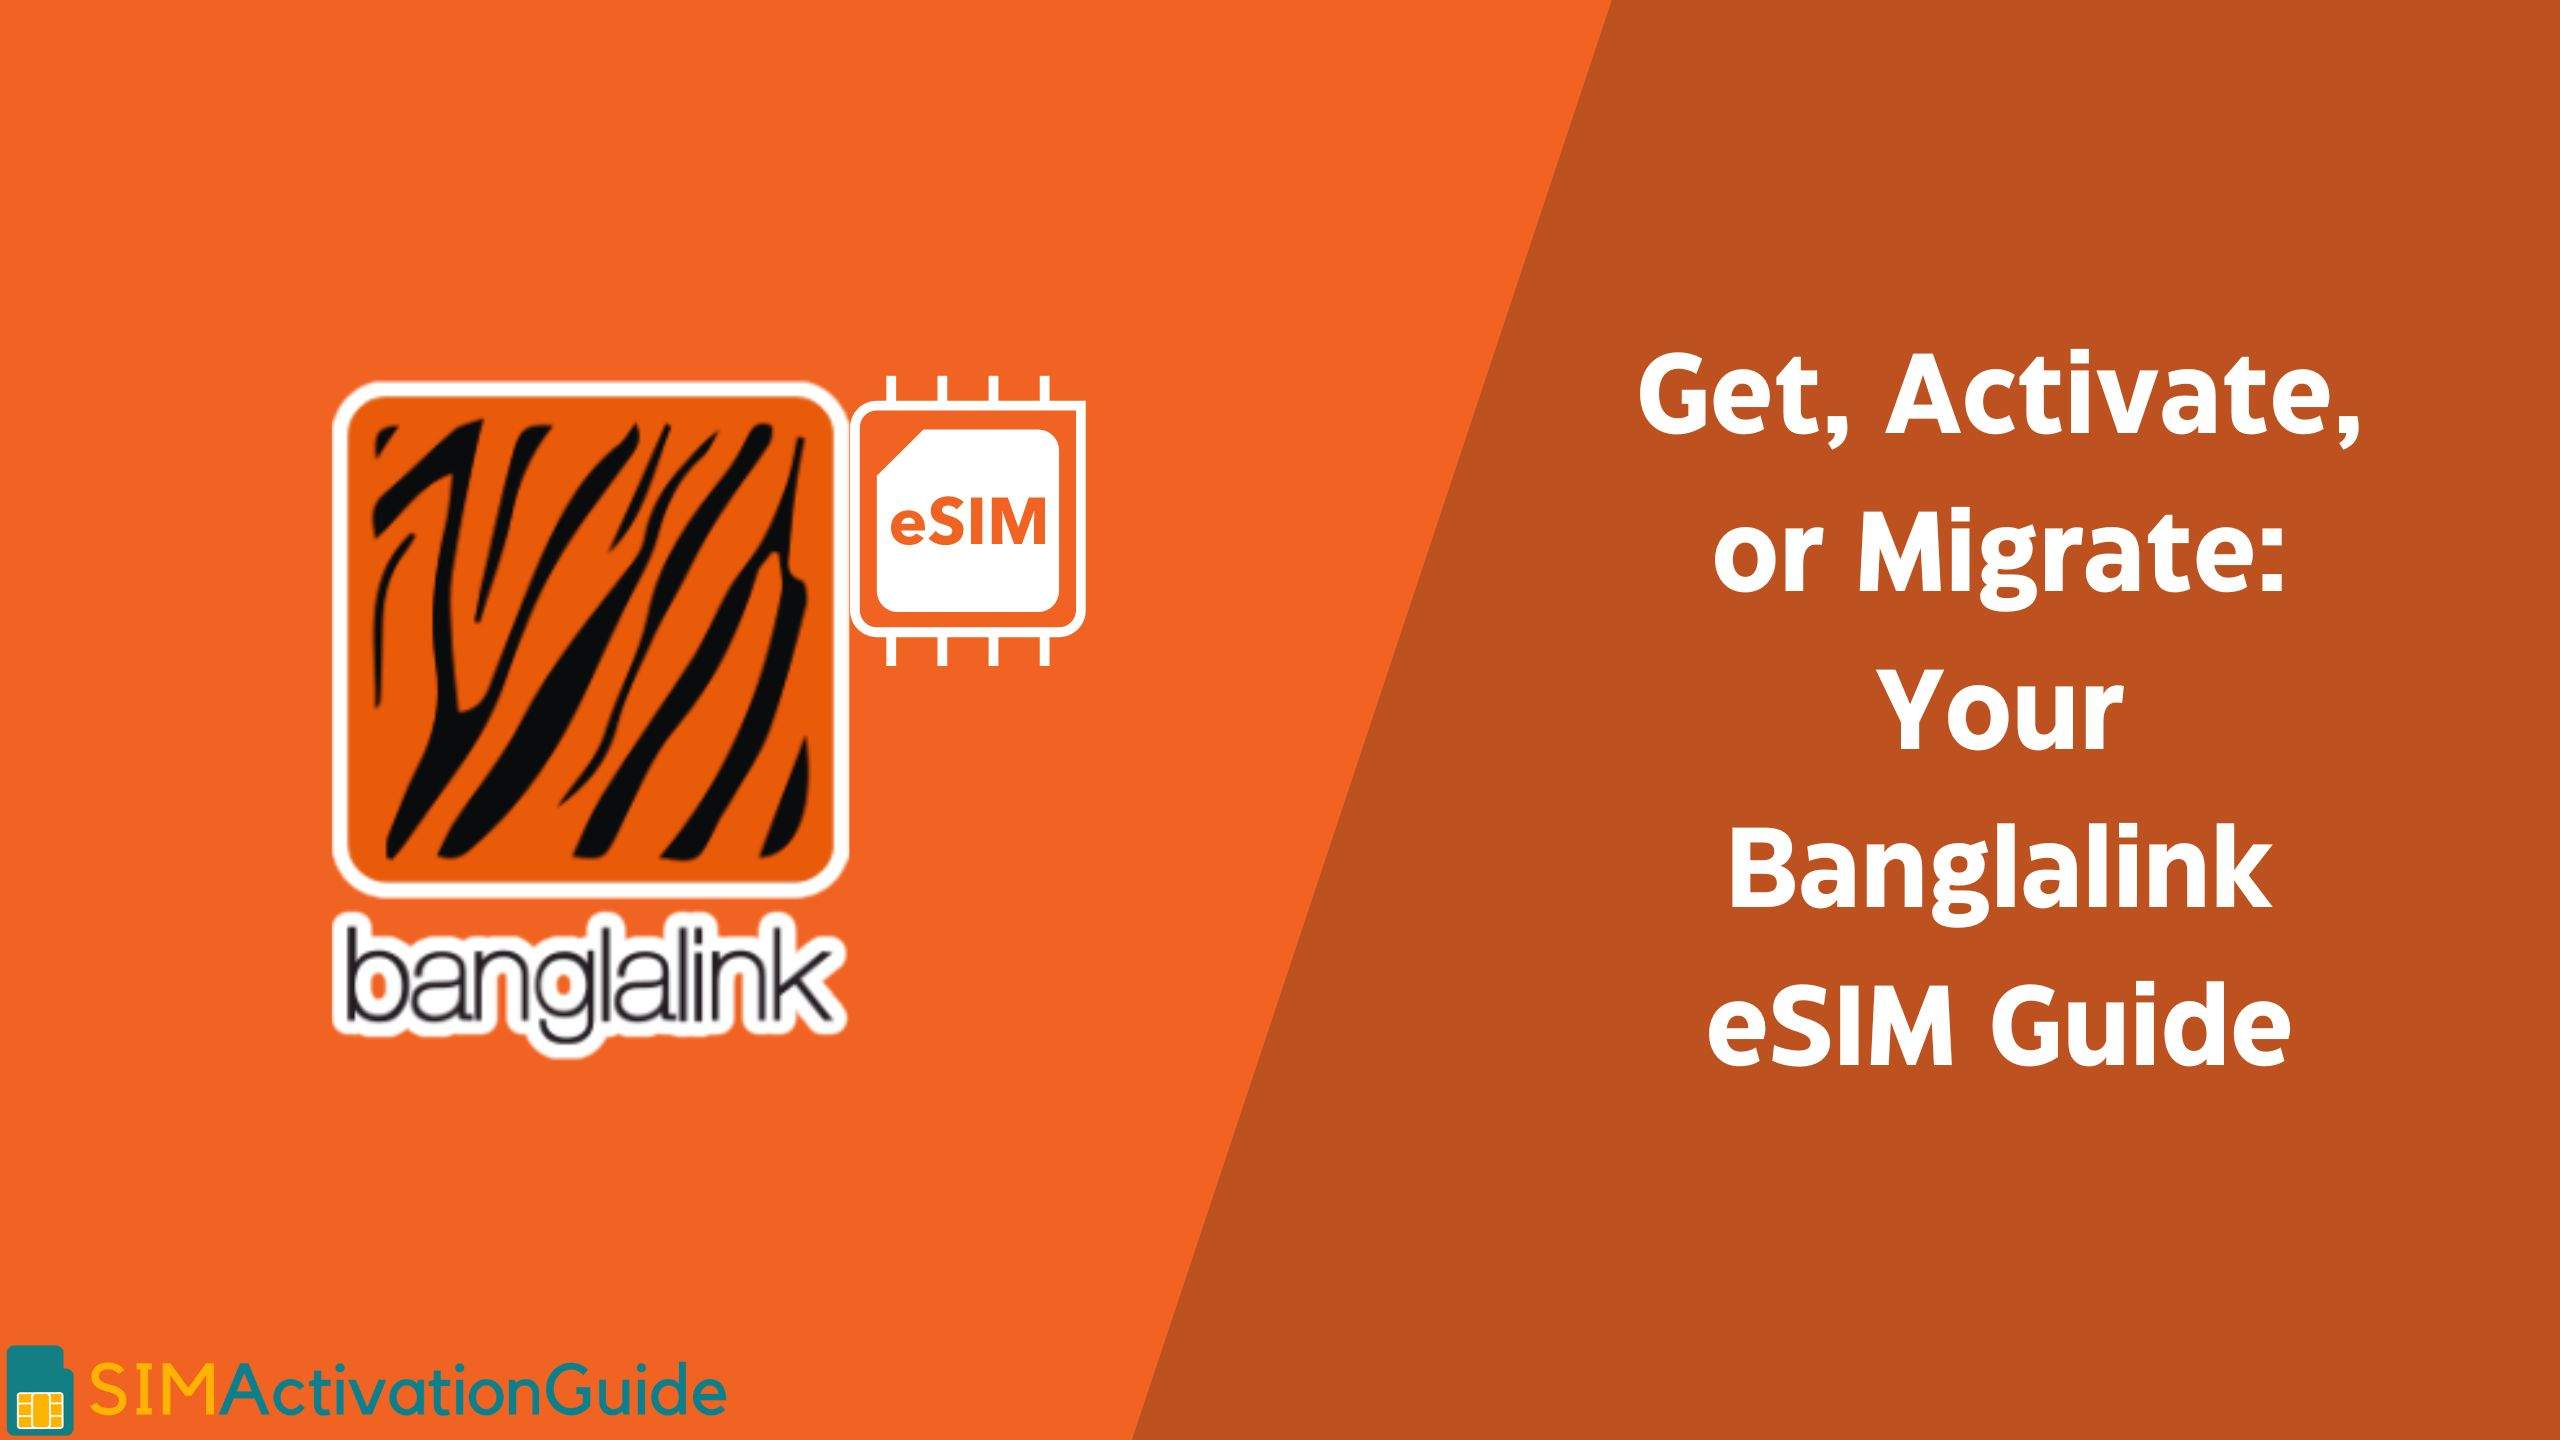 Get, Activate, or Migrate: Your Banglalink eSIM Guide